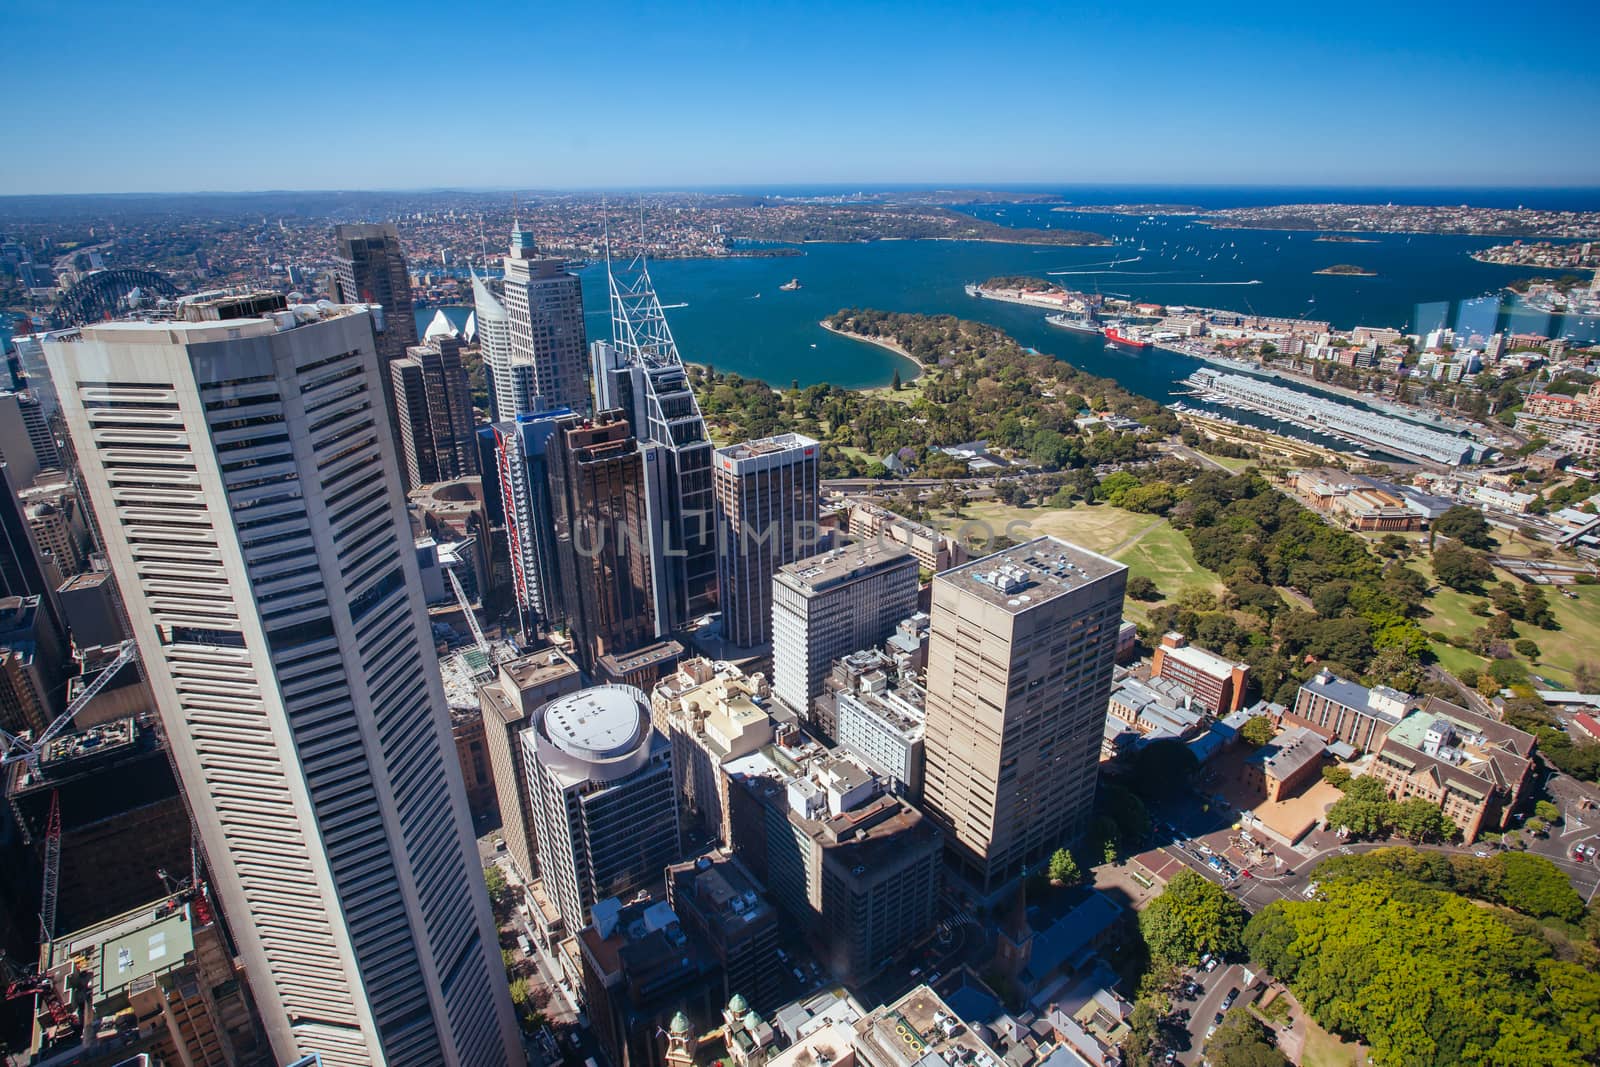 The Sydney CBD and surrounding harbour on a clear spring day on October 16th 2013.